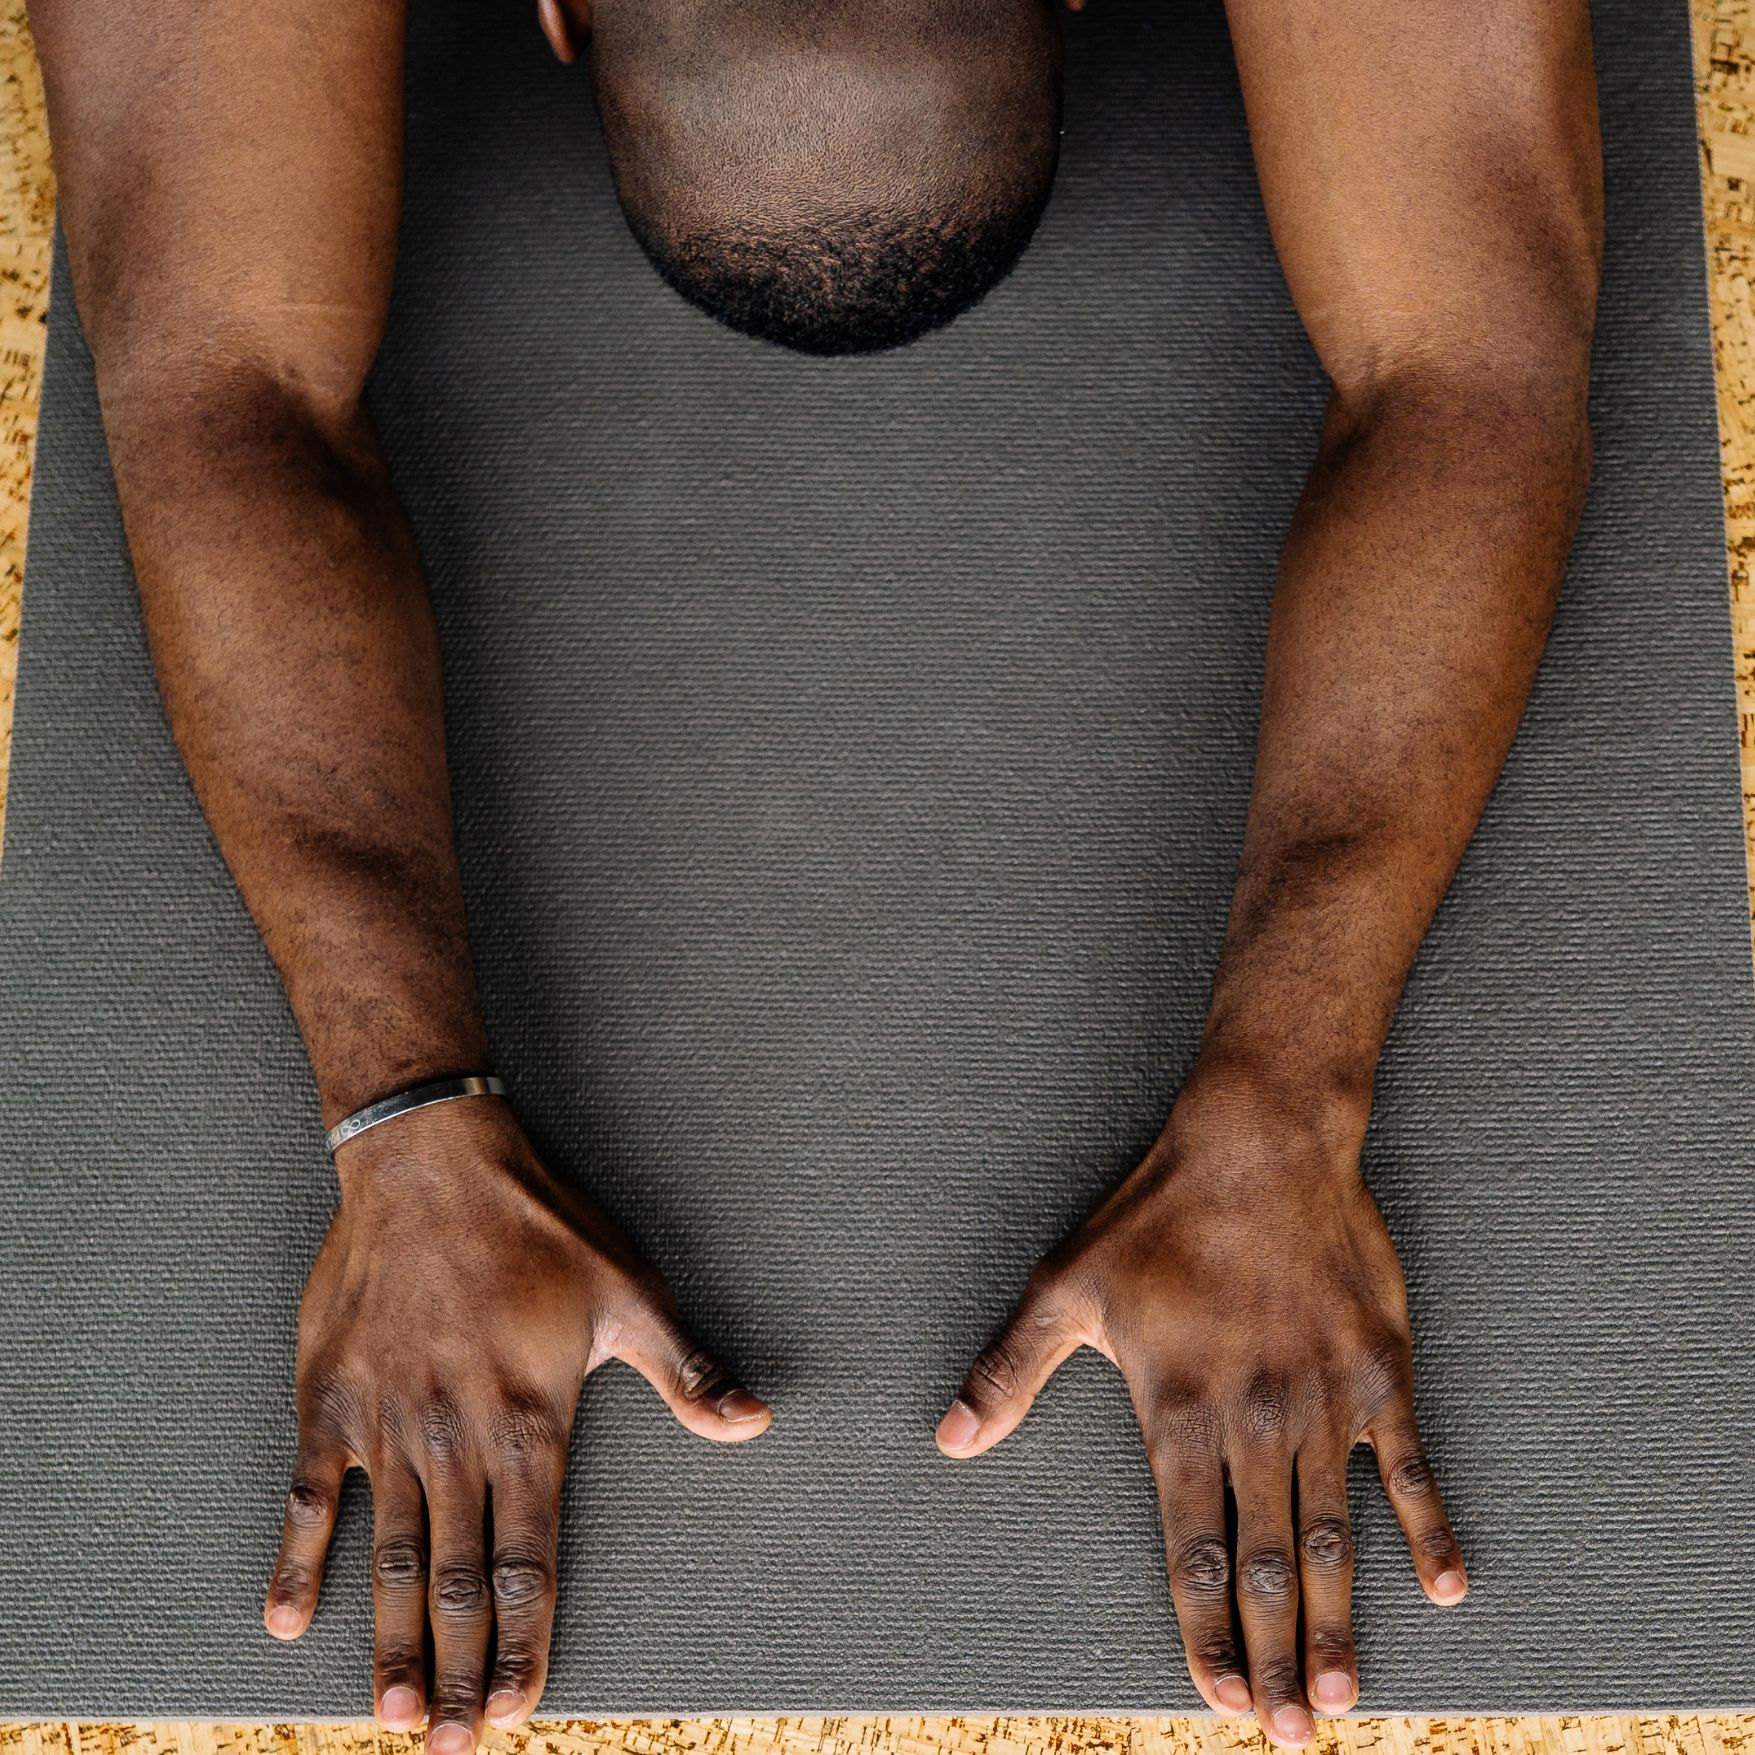 Hands of Black man on grey yoga mat in child's pose